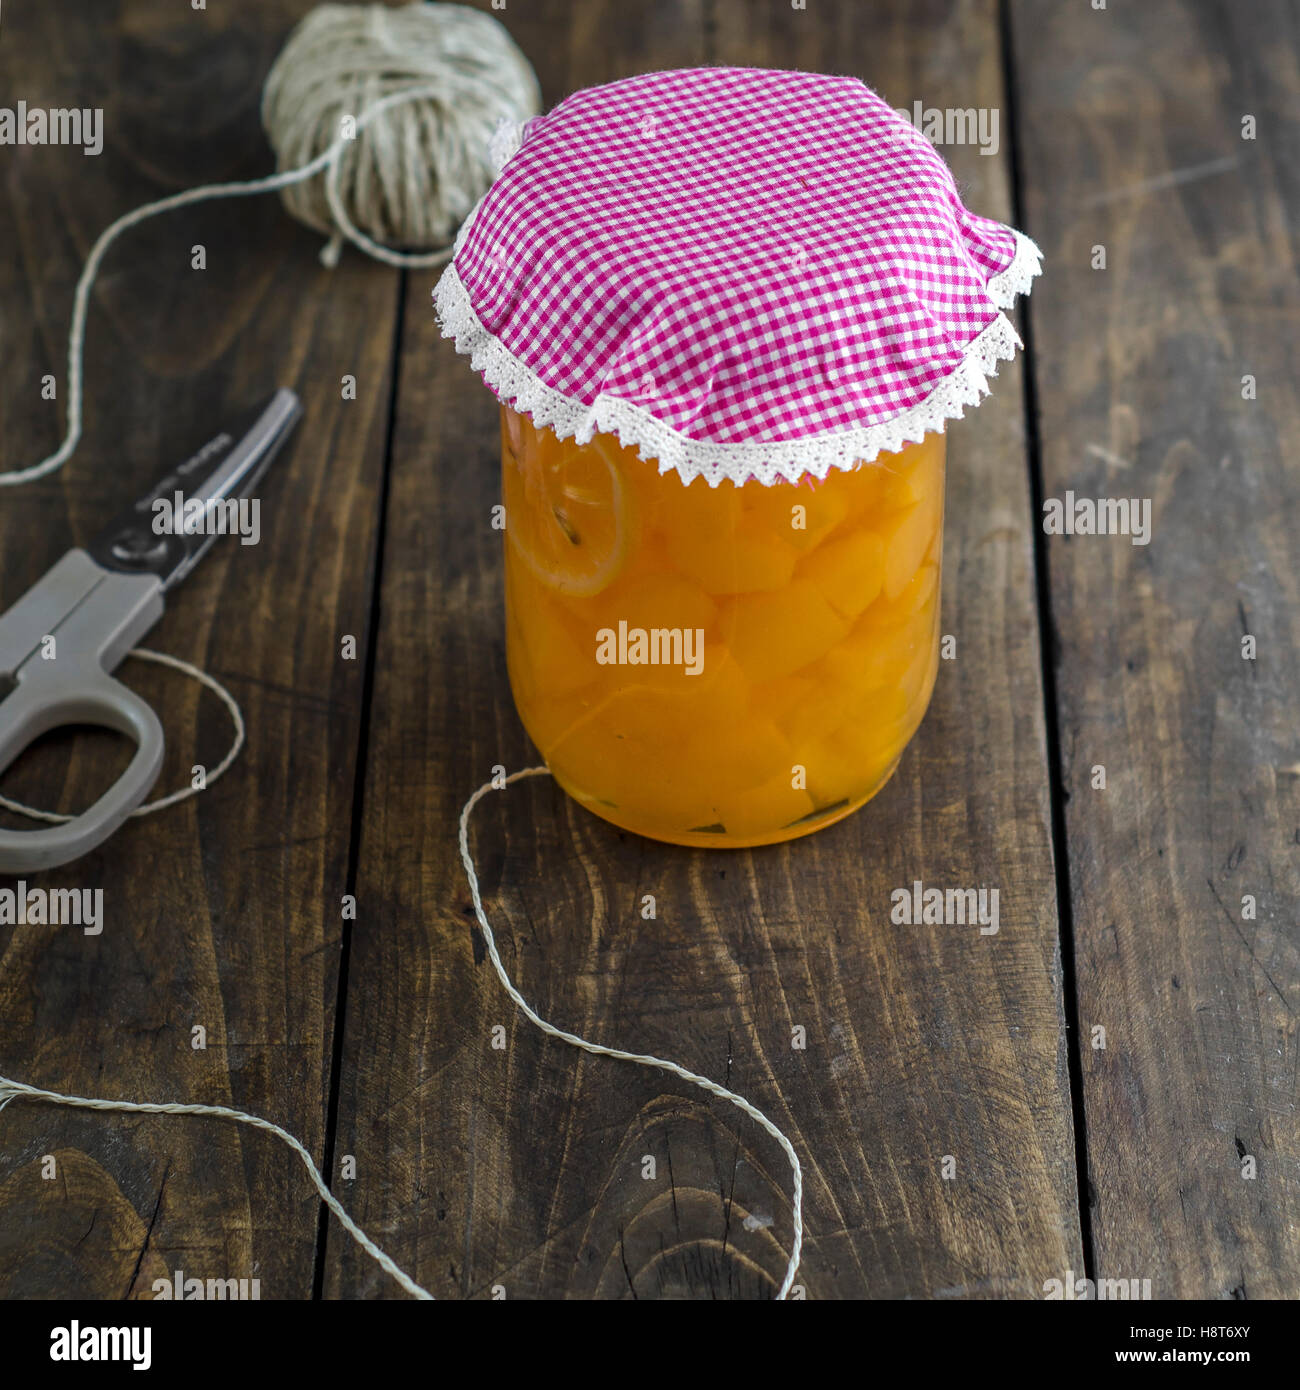 Homemade canned peaches on wooden table. Stock Photo